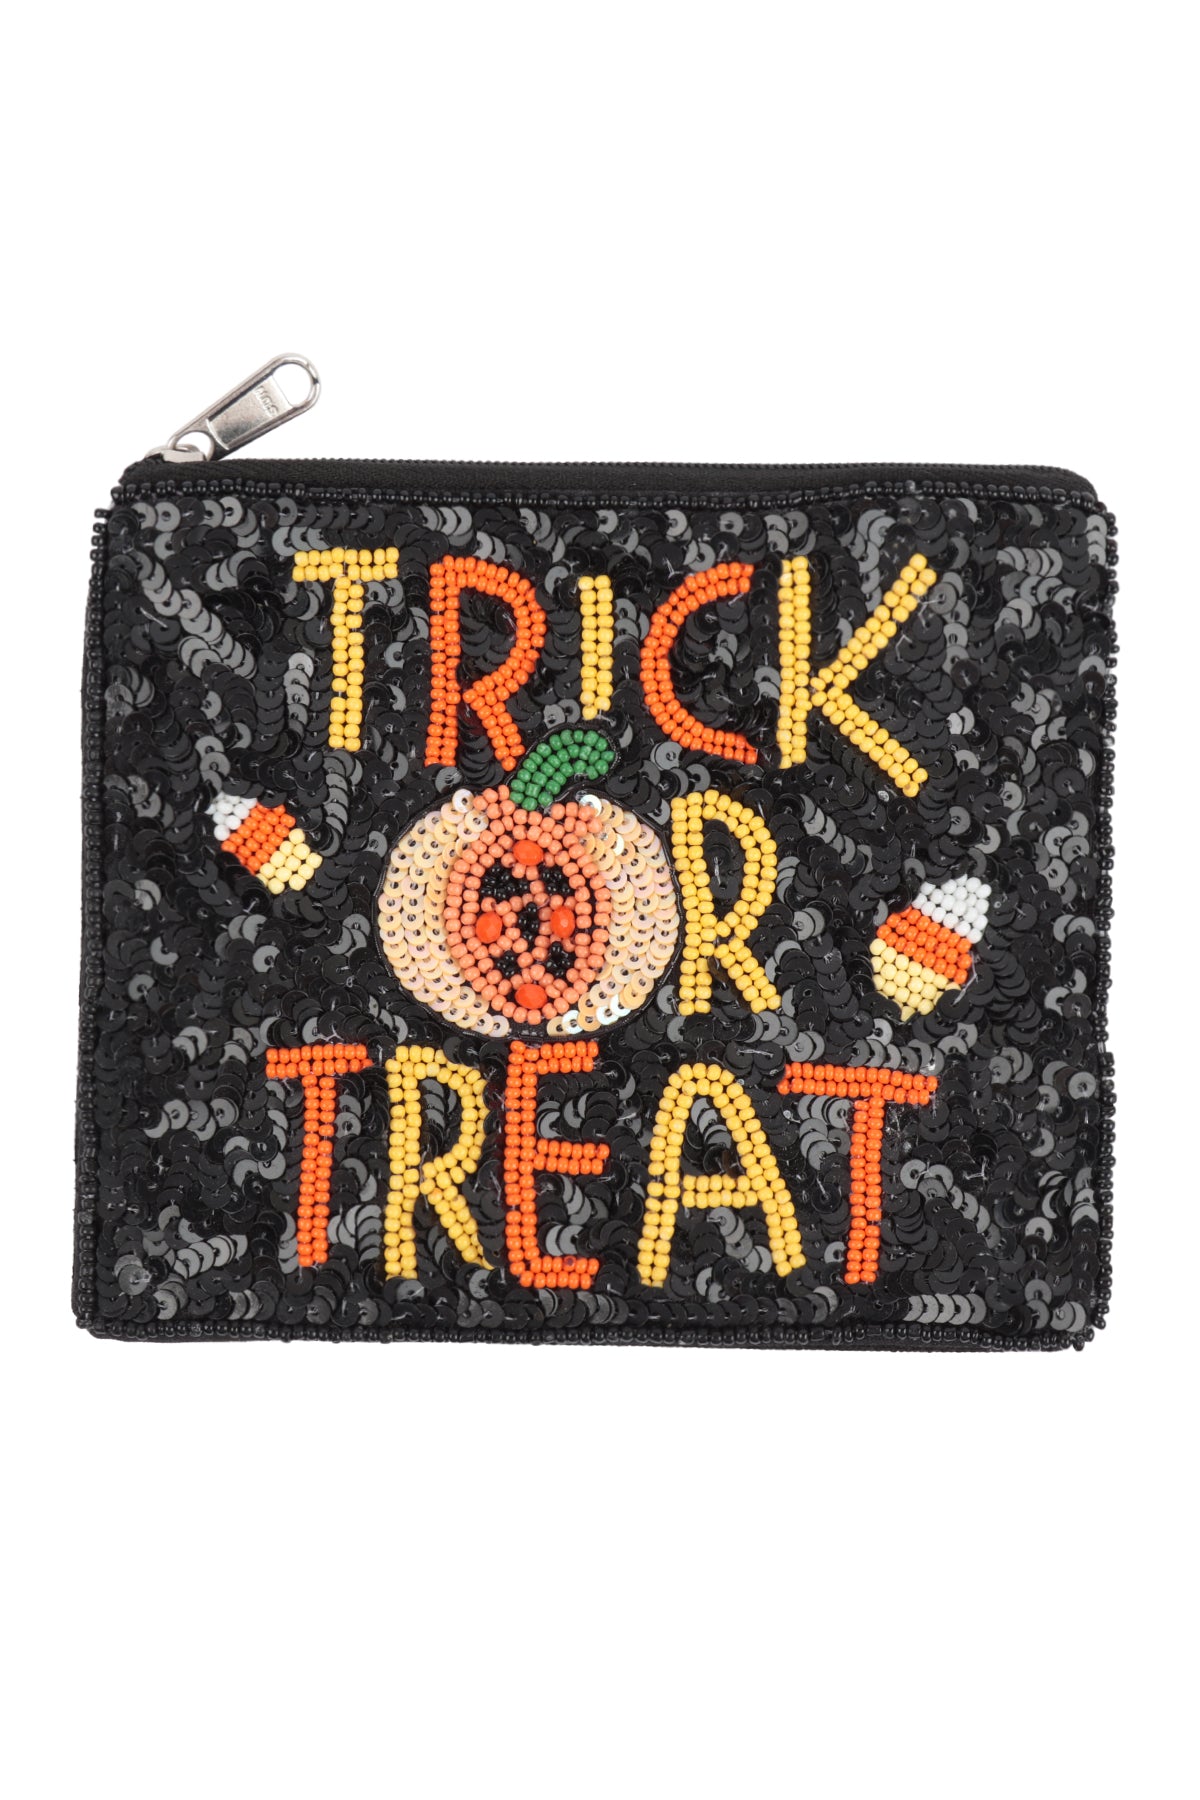 TRICK OR TREAT HALLOWEEN SEQUIN COIN POUCH-BLACK